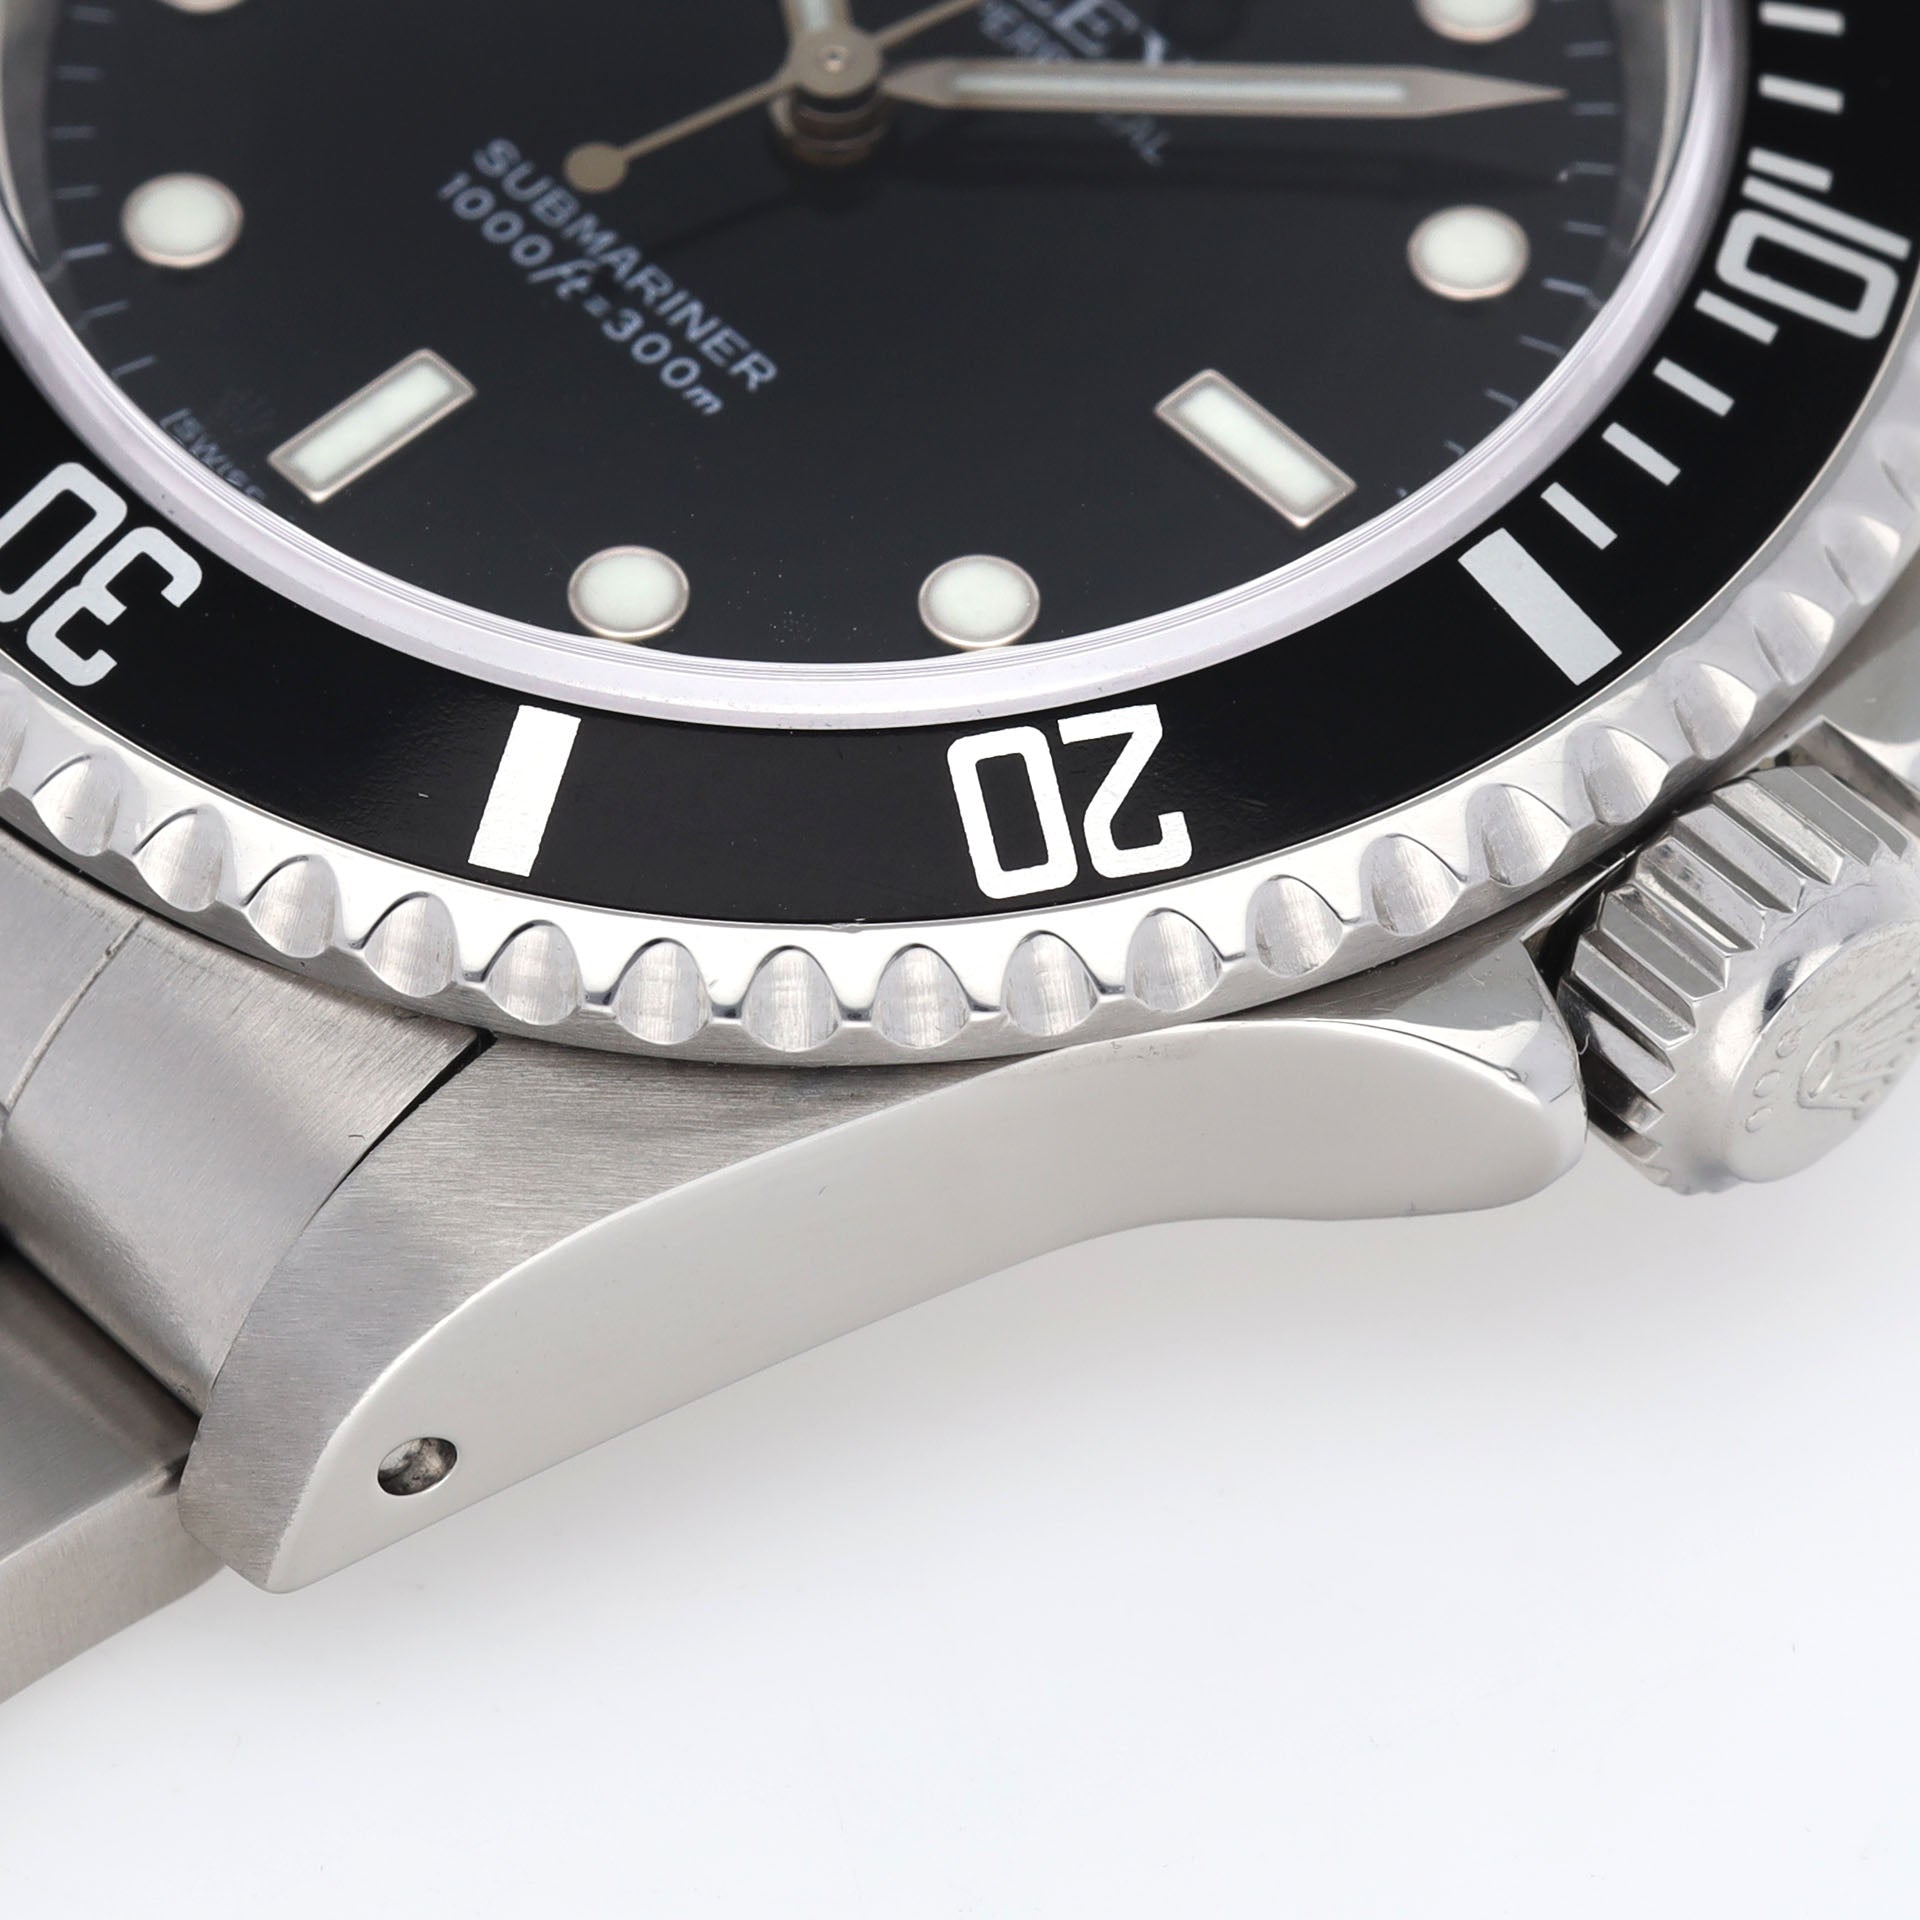 Rolex Submariner 14060M Two-Line Dial Box and Papers